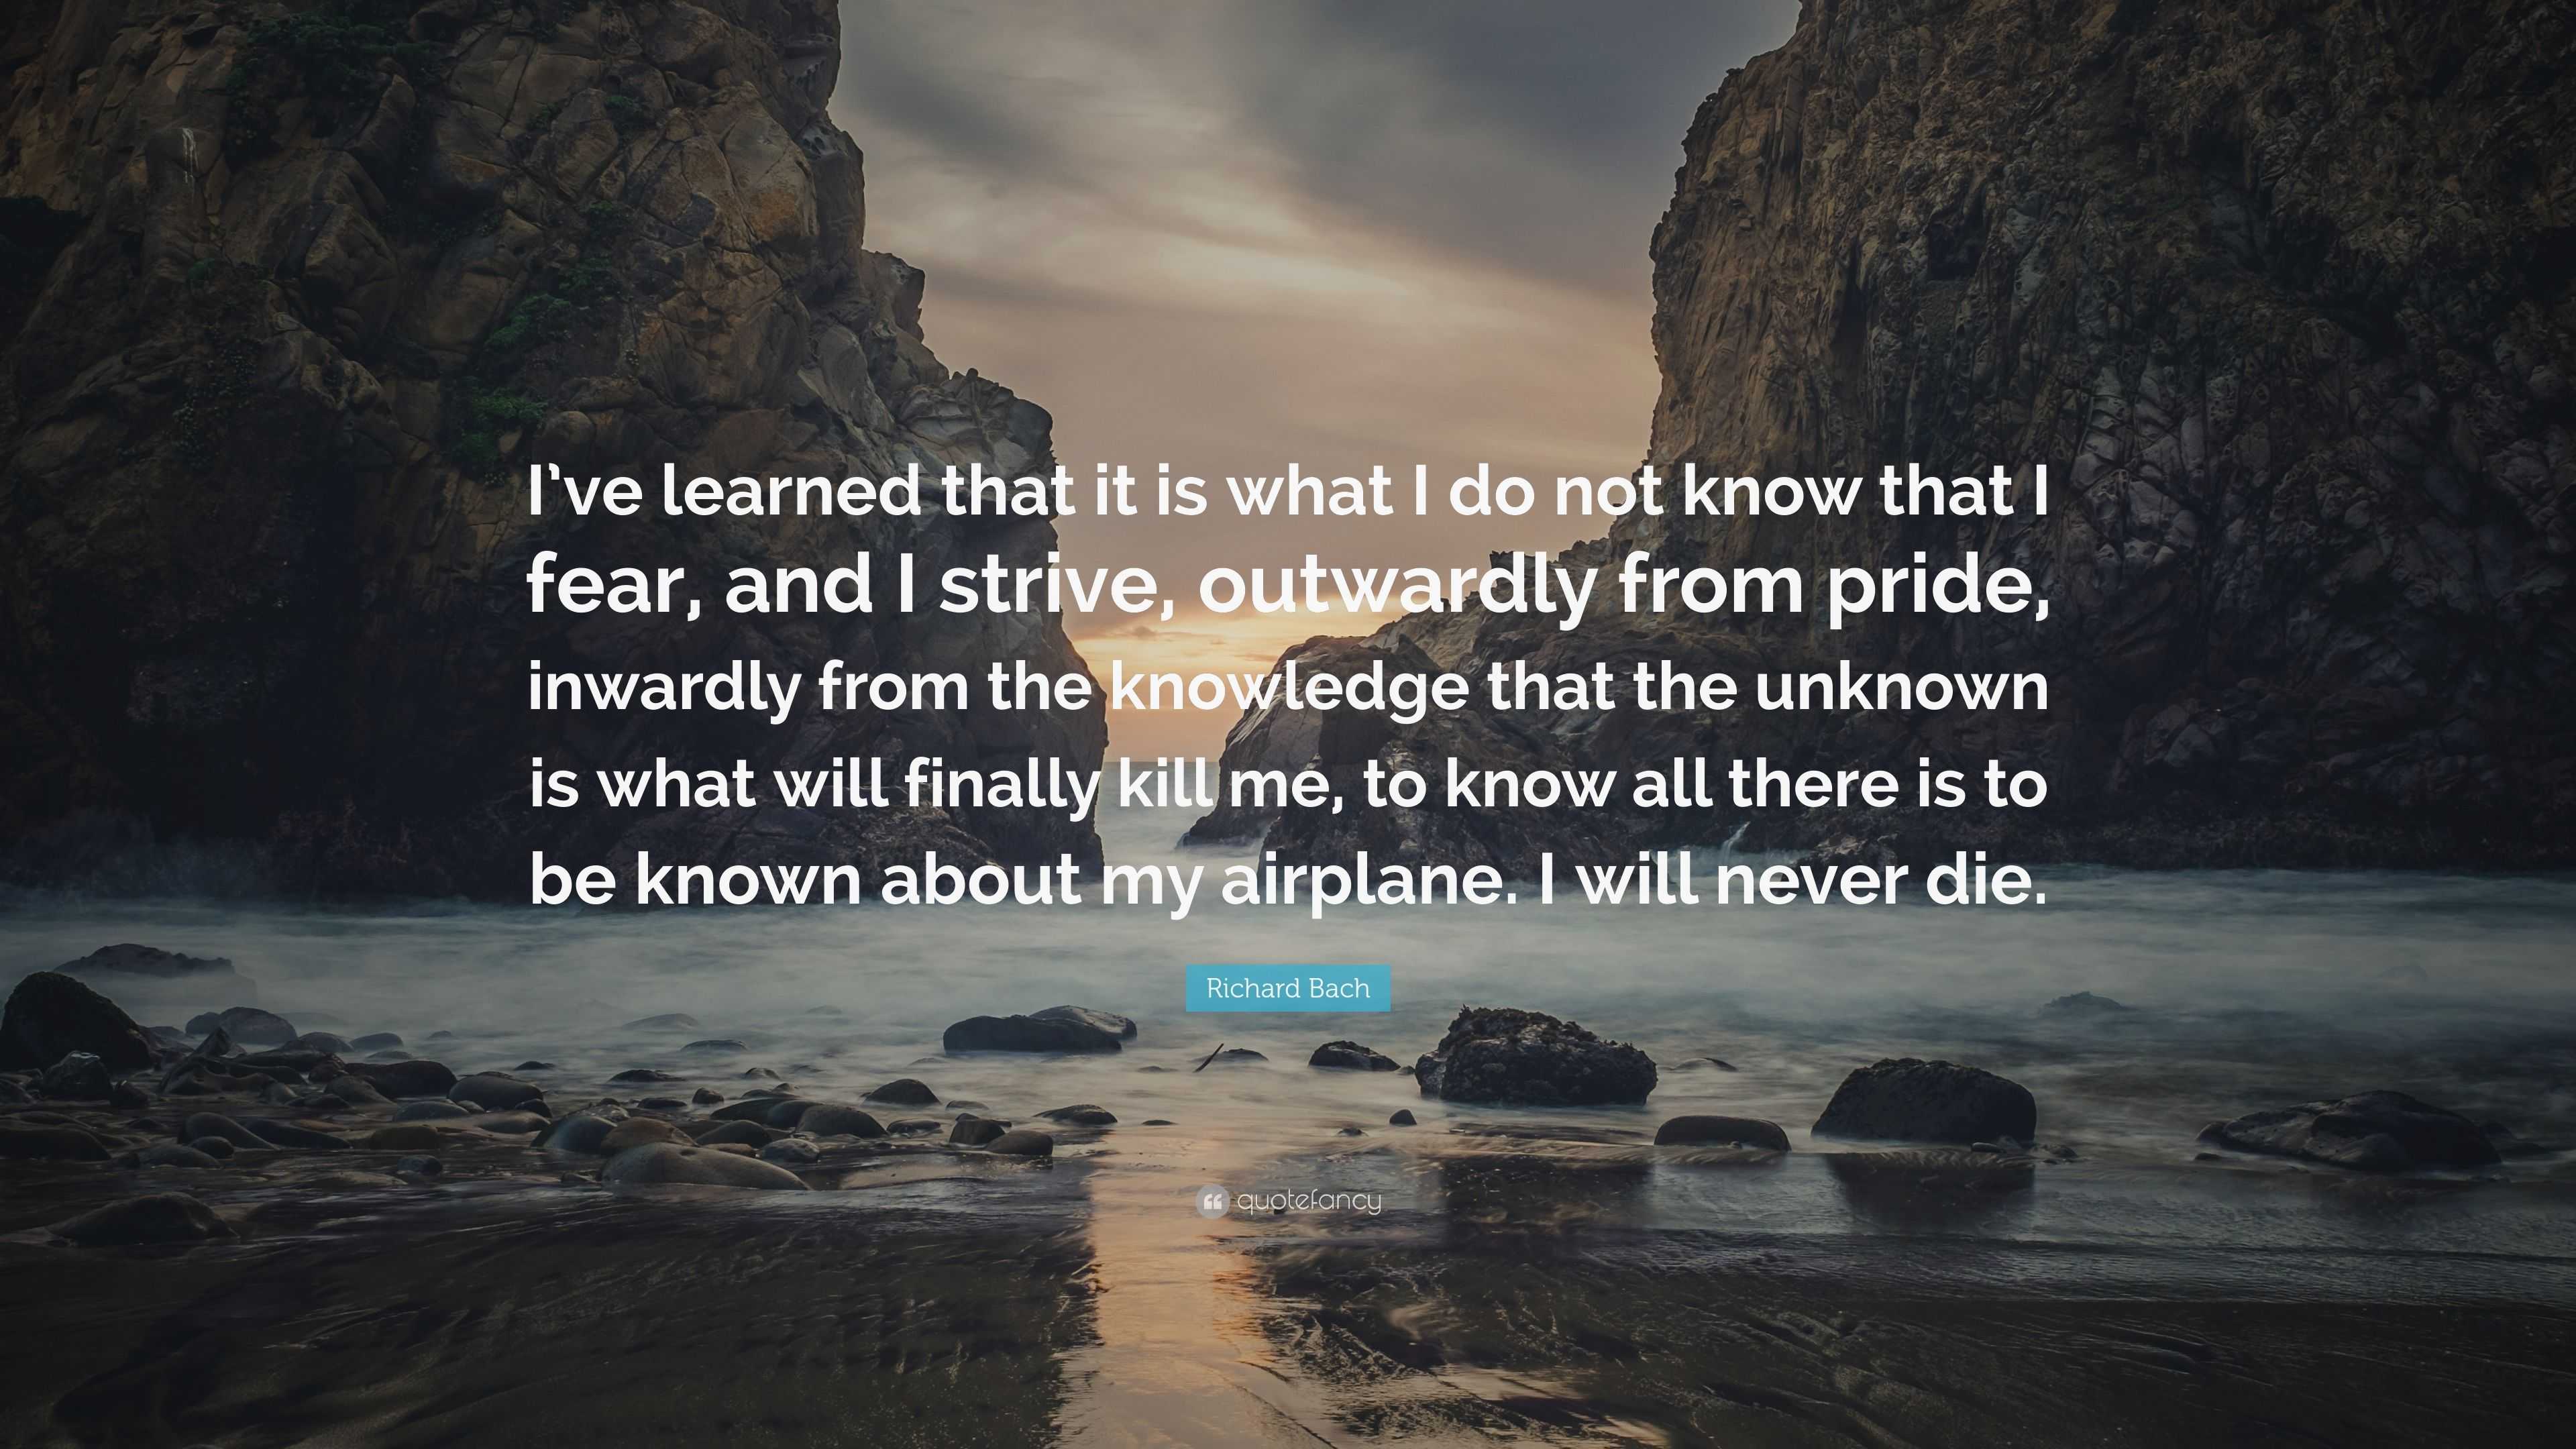 Richard Bach Quote “I’ve learned that it is what I do not know that I